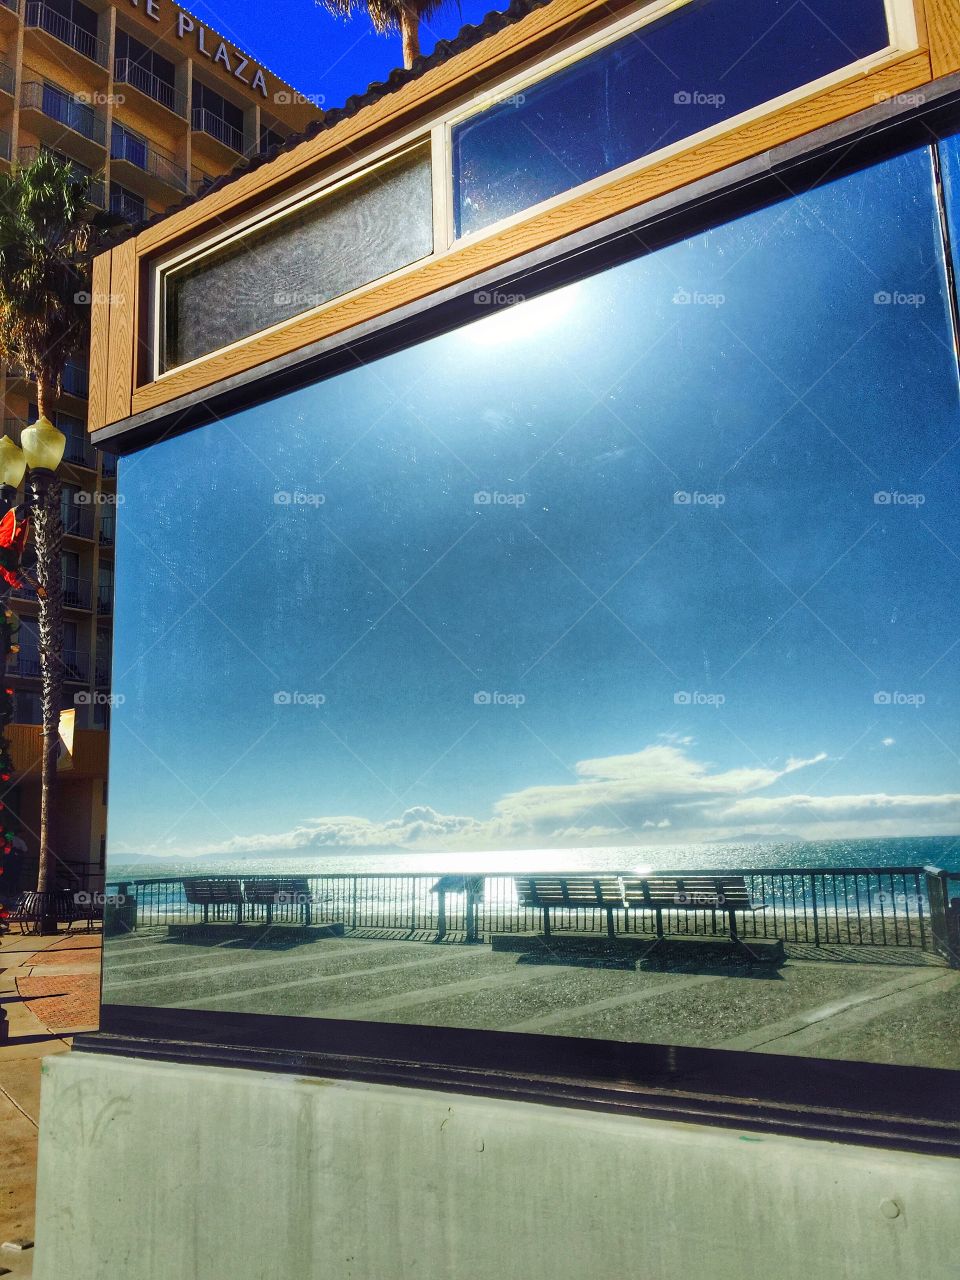  Picture Window  Reflections. Reflections of the blue sky and ocean view as seen from a big glass window at a California, United States beach.